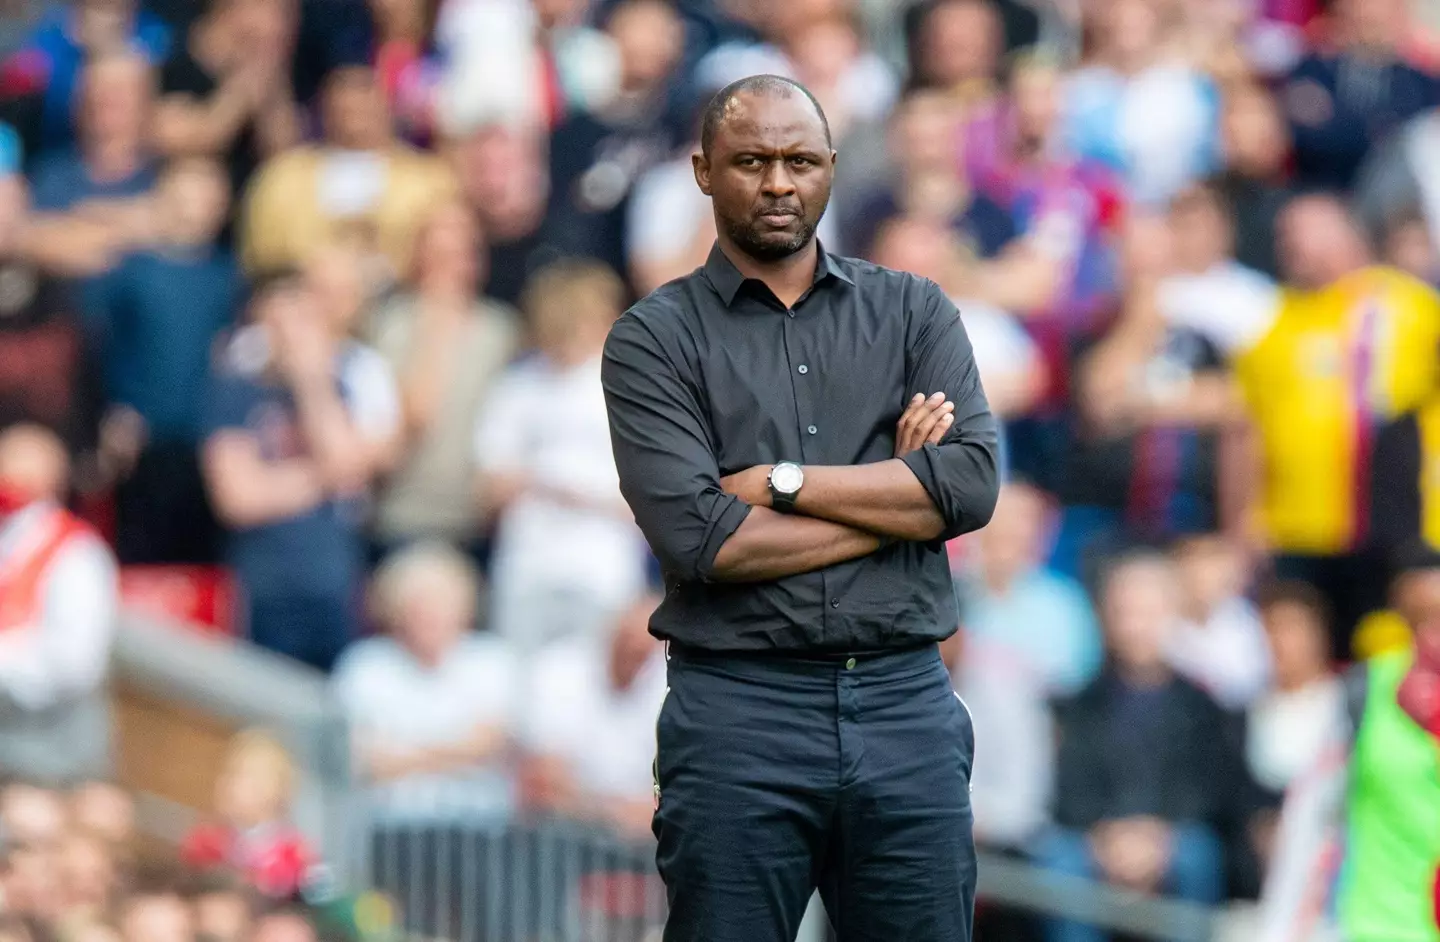 Patrick Vieira said he has 'nothing to say' about the footage.